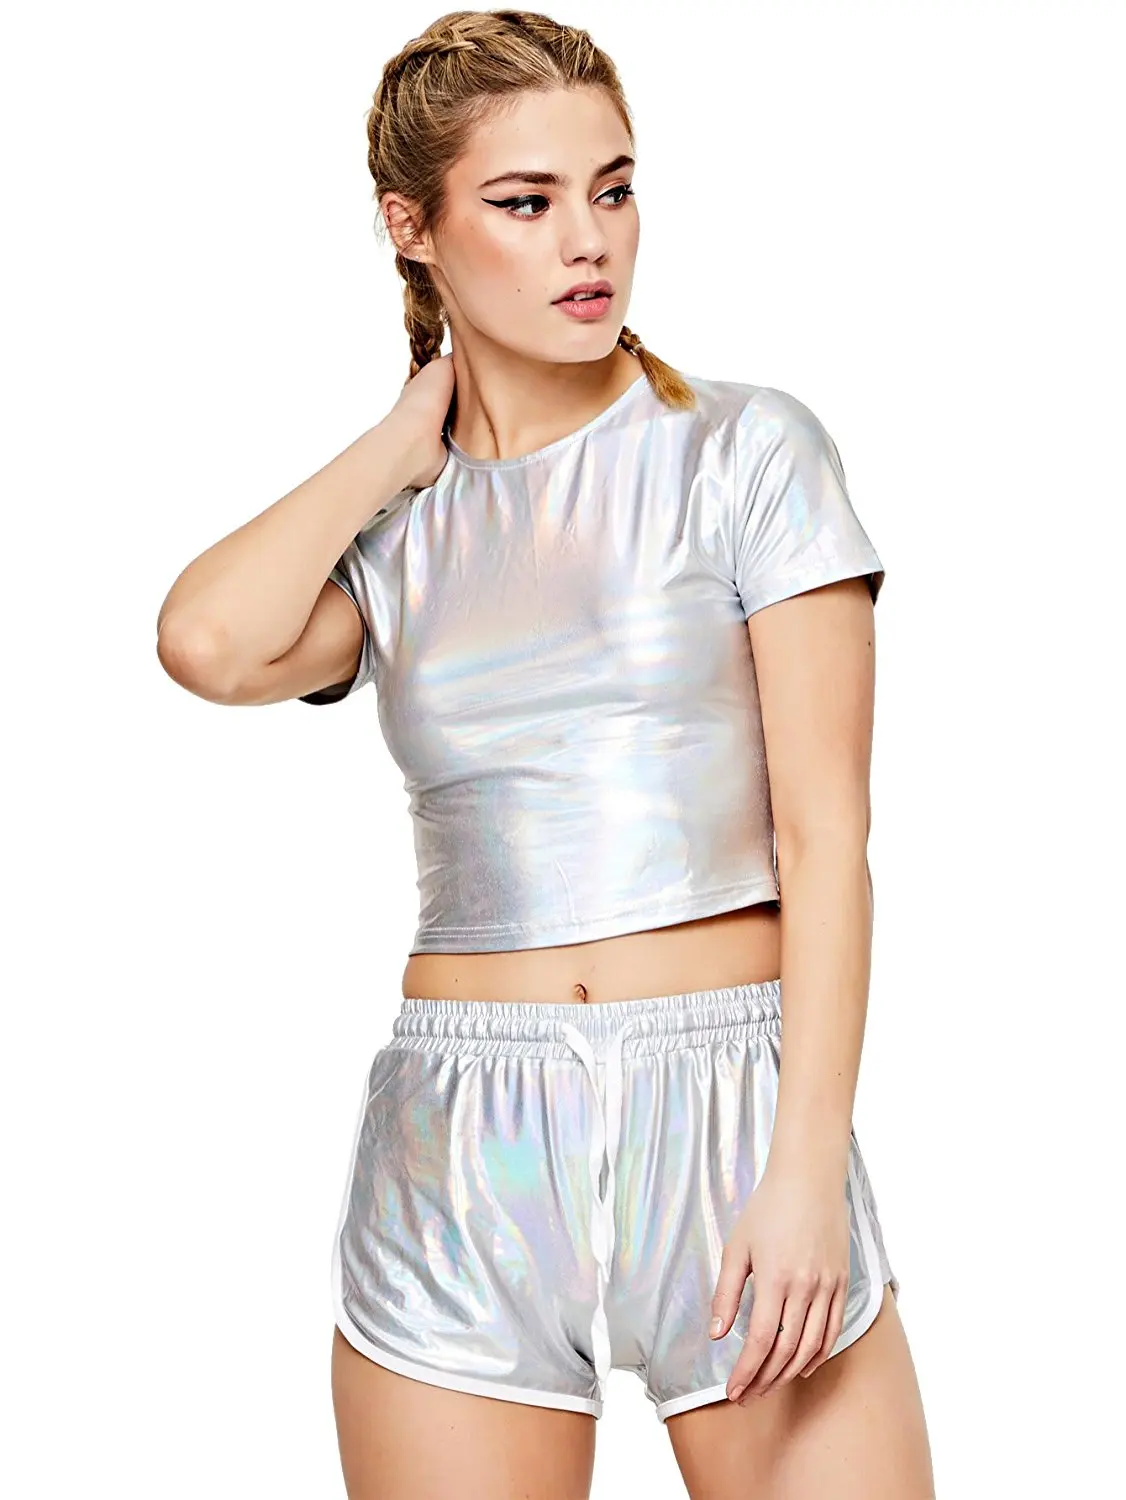 Cheap Shiny Outfit, find Shiny Outfit deals on line at Alibaba.com